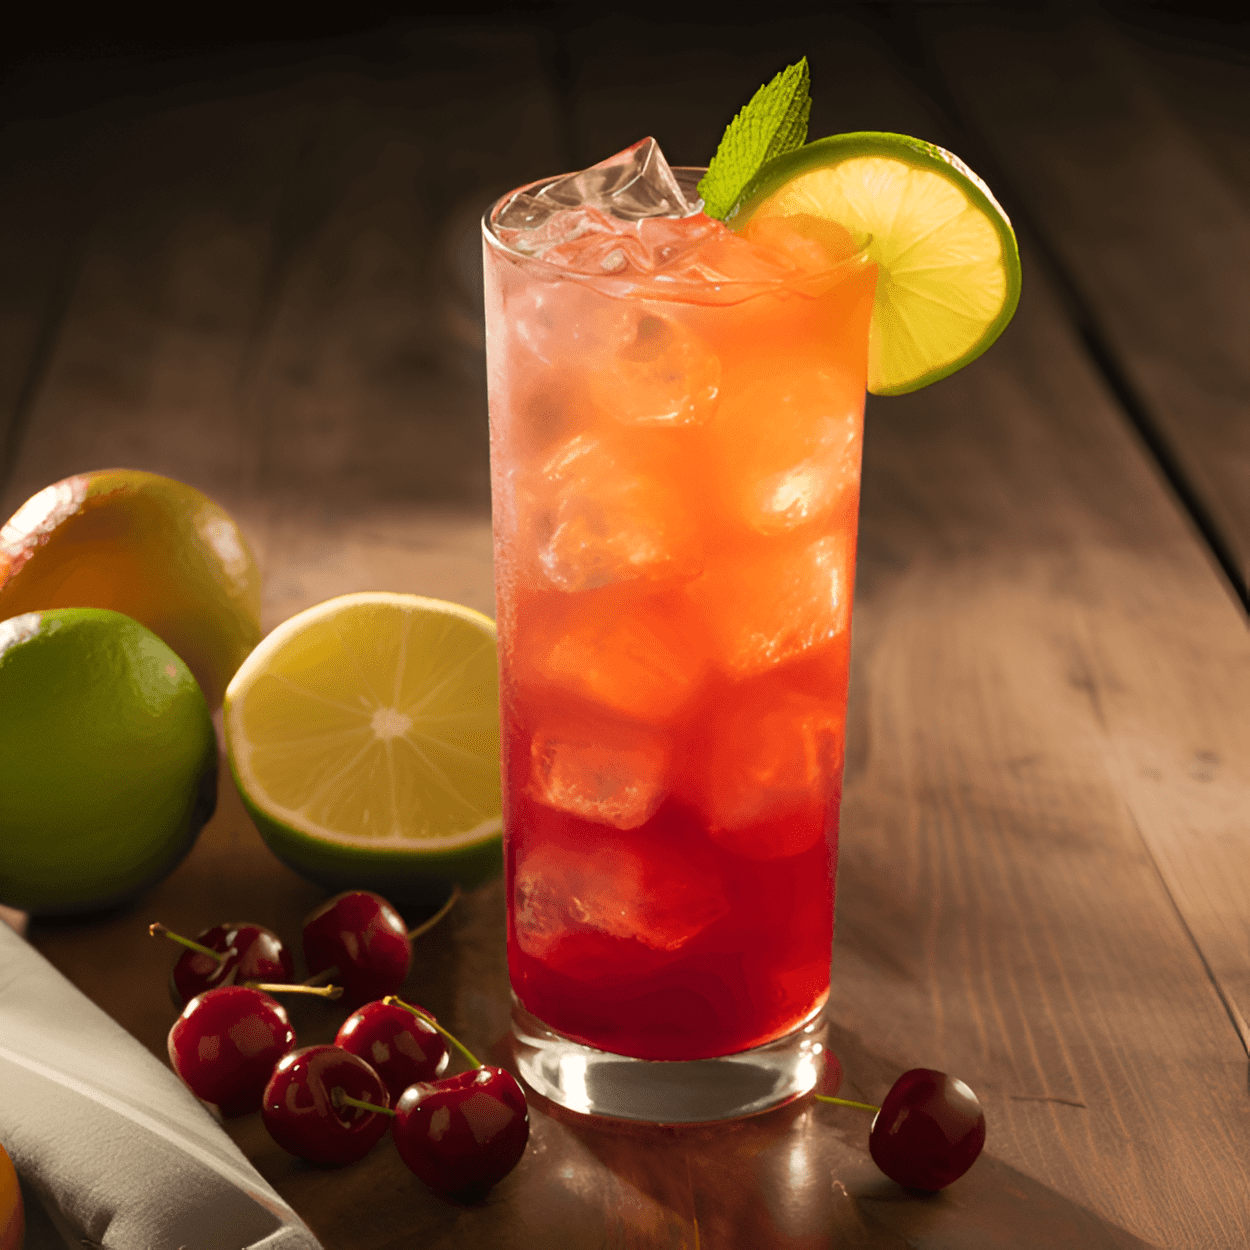 Shaved Beaver Cocktail Recipe - The Shaved Beaver cocktail is a delightful balance of sweet and sour, with a fruity undertone. The Canadian whiskey adds a smooth, rich depth, while the peach schnapps and cranberry juice bring a refreshing sweetness and tartness respectively.